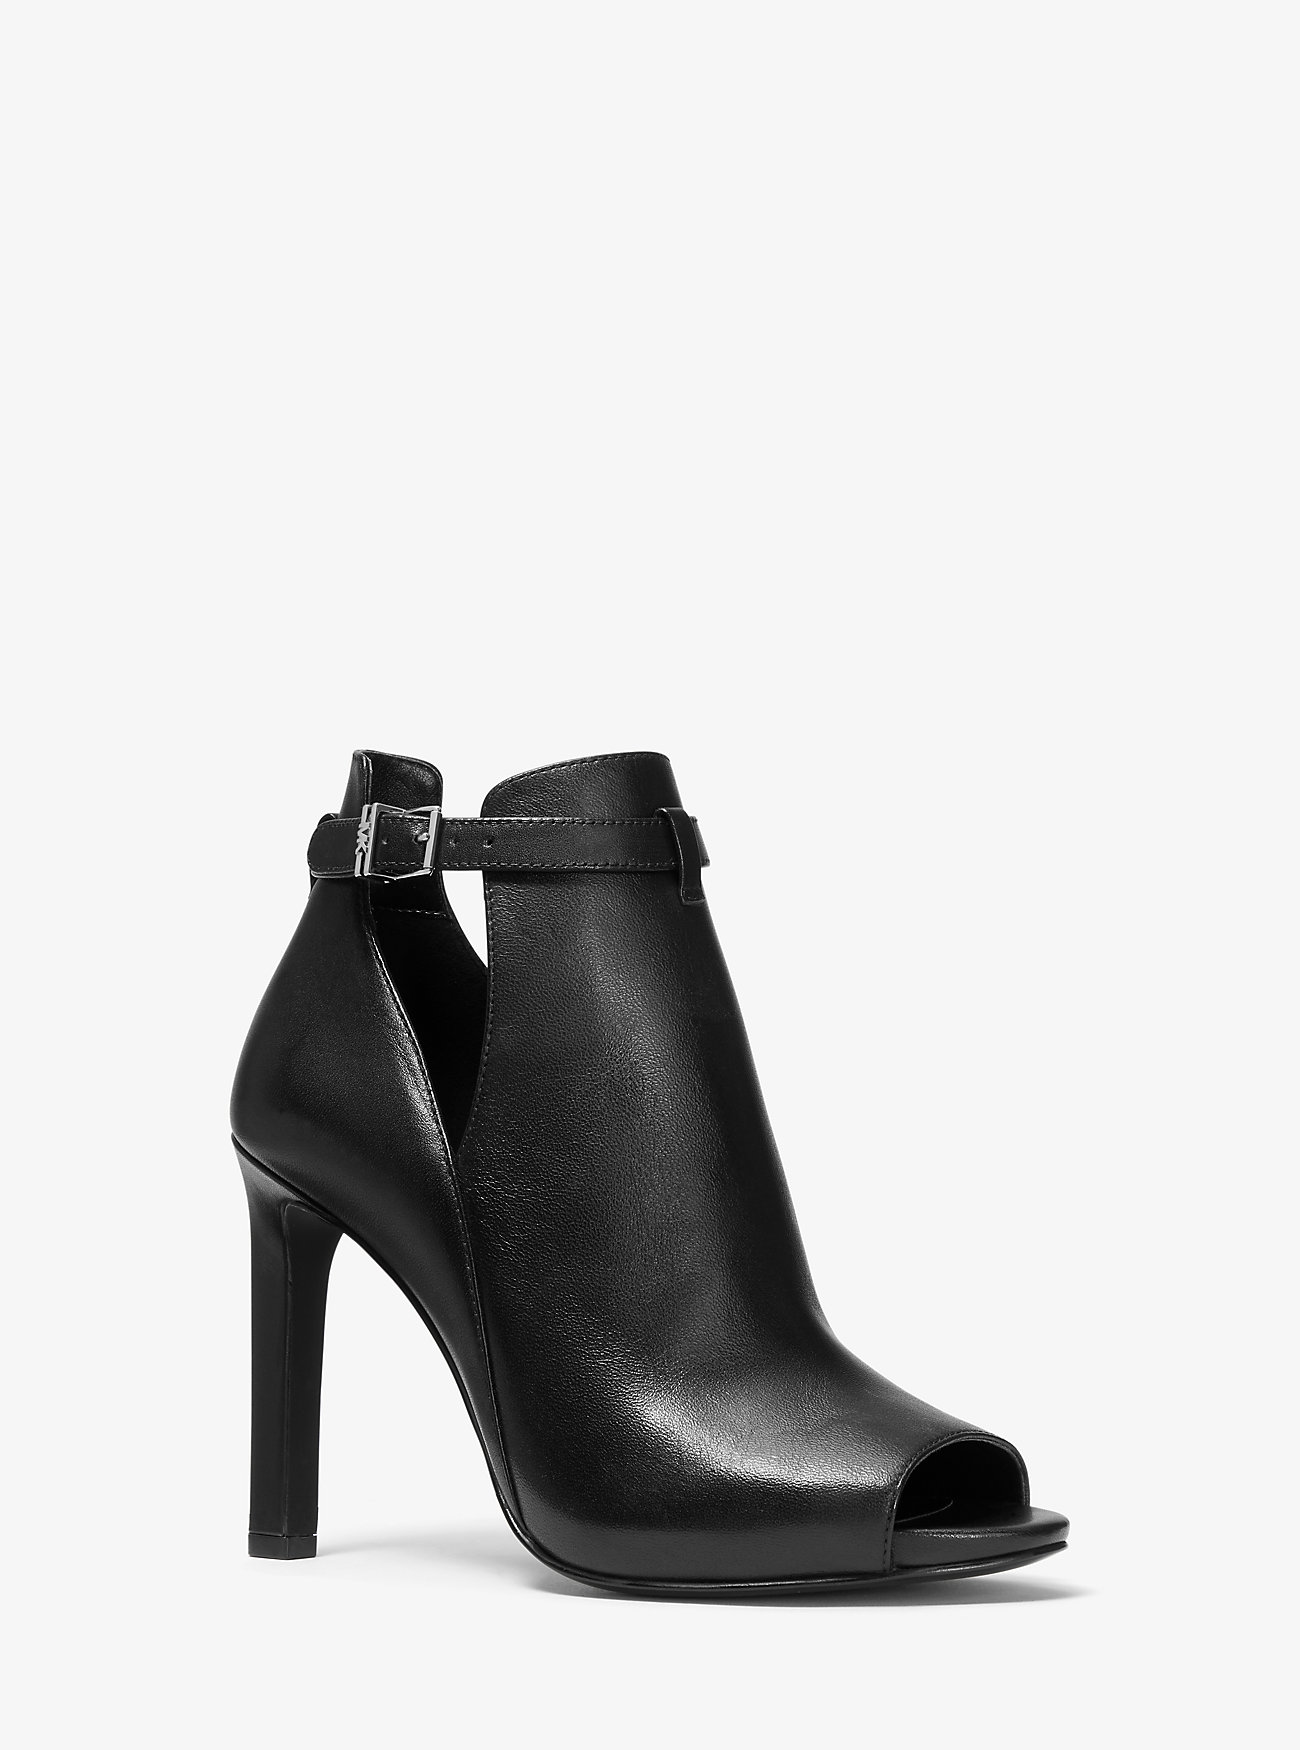 Michaelkors Lawson Leather Open-Toe Ankle Boot